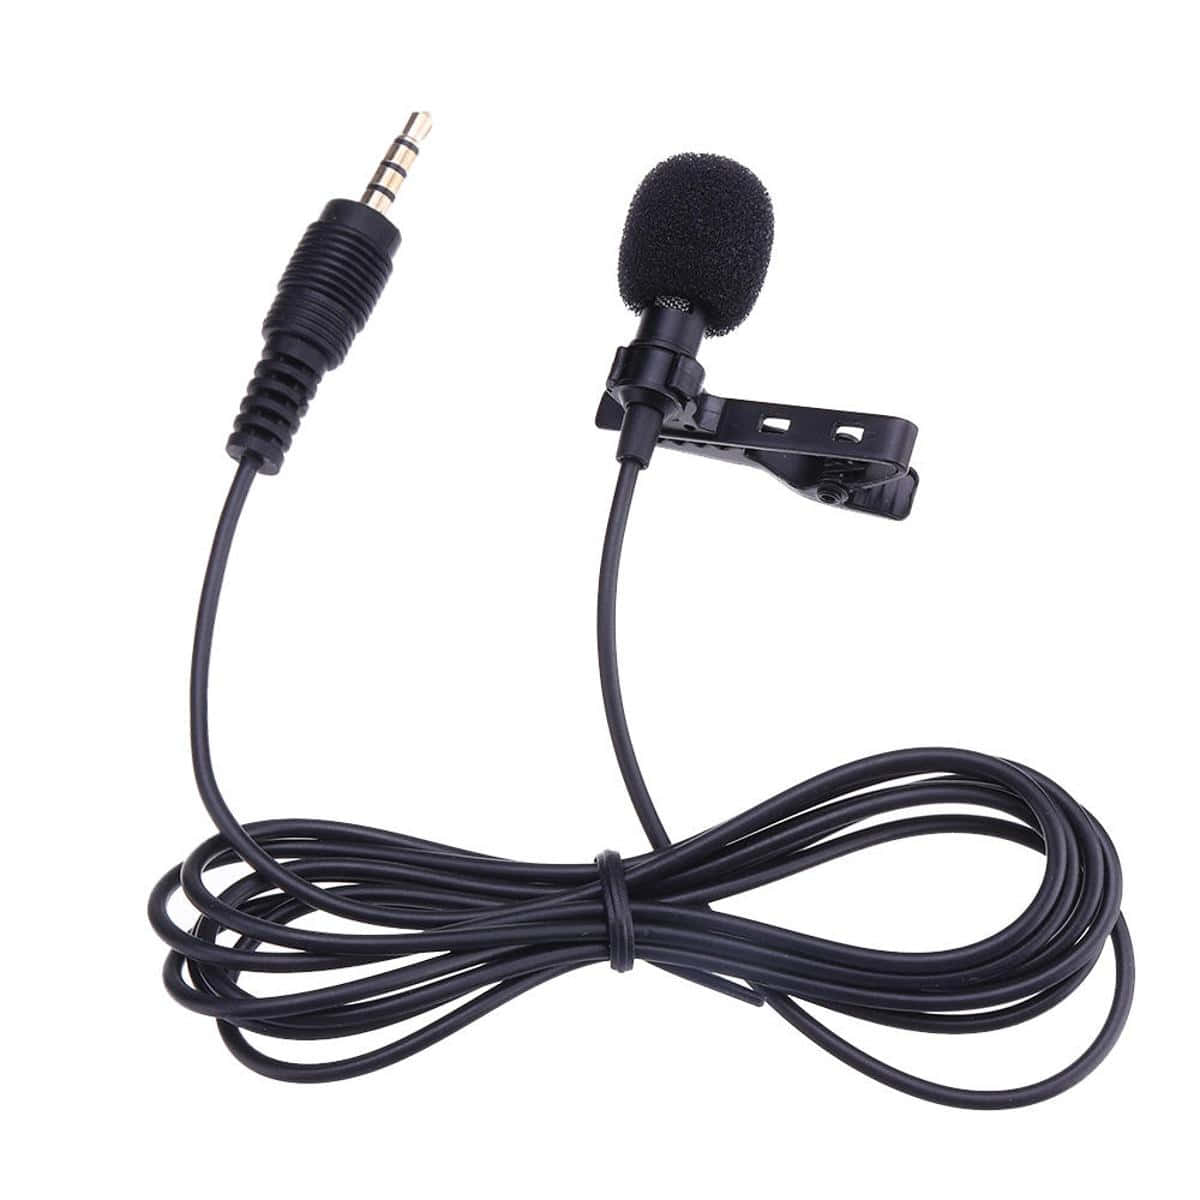 A professional microphone perfect for music recording.